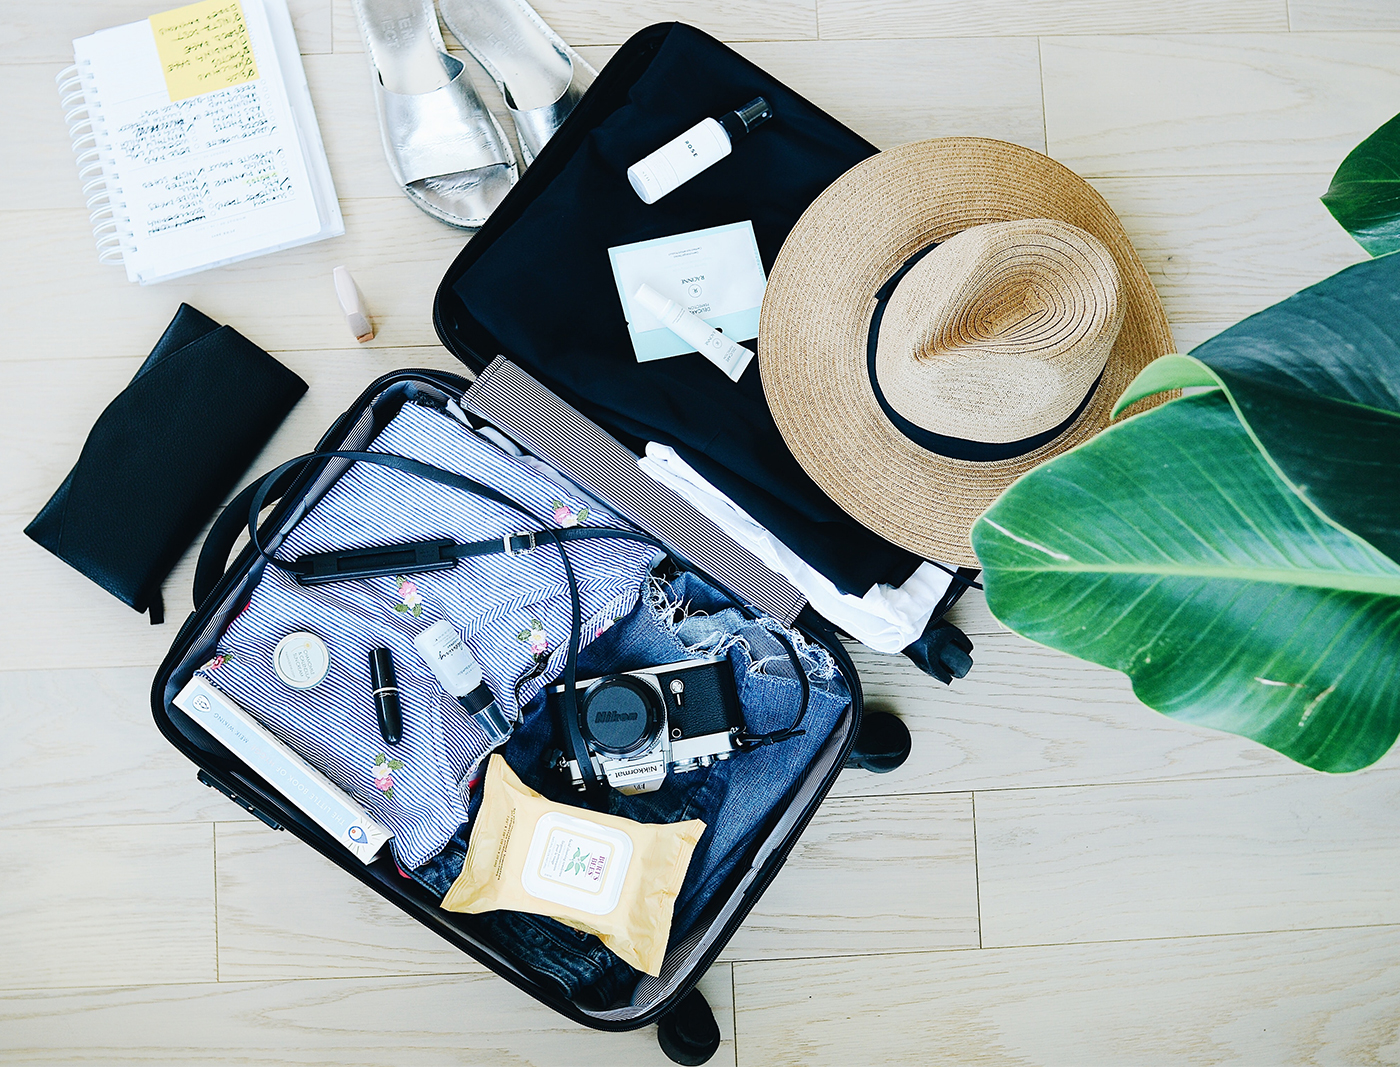 Your Ultimate Destination Wedding Packing List